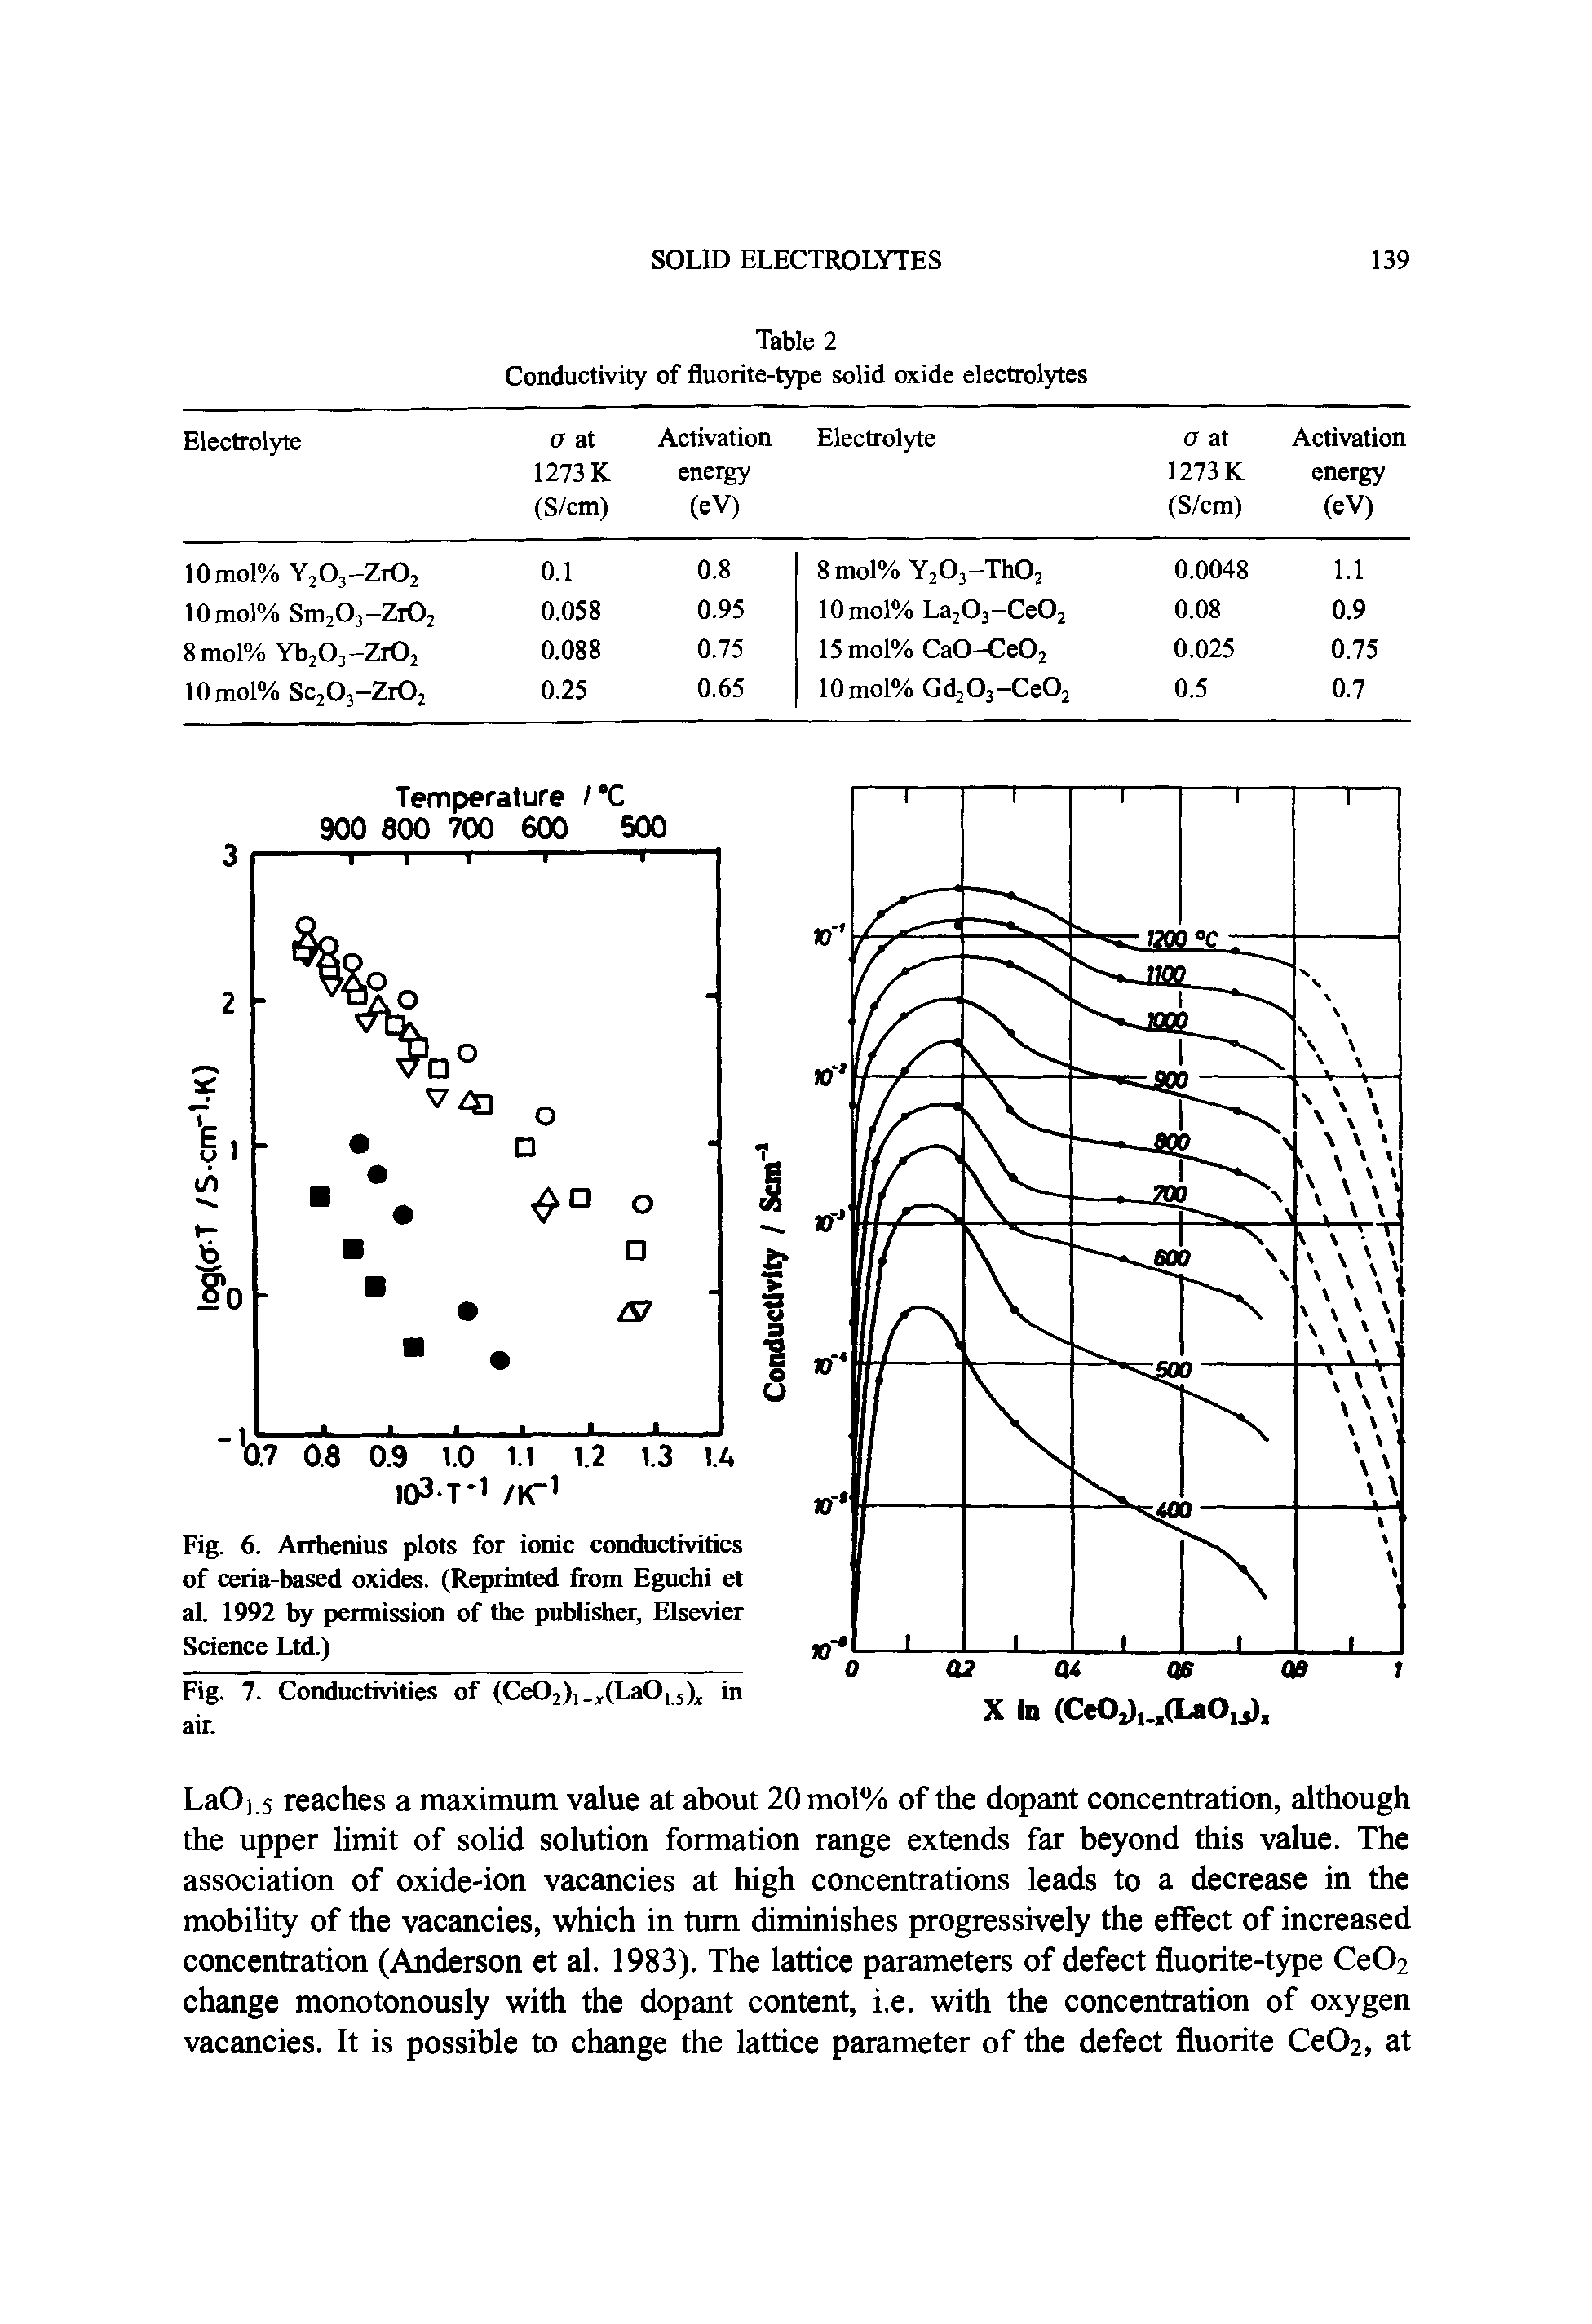 Fig. 6. Arrhenius plots for ionic conductivities of ceria-based oxides. (Reprinted from Eguchi et al. 1992 by permission of the publisher, Elsevier Science Ltd.)...